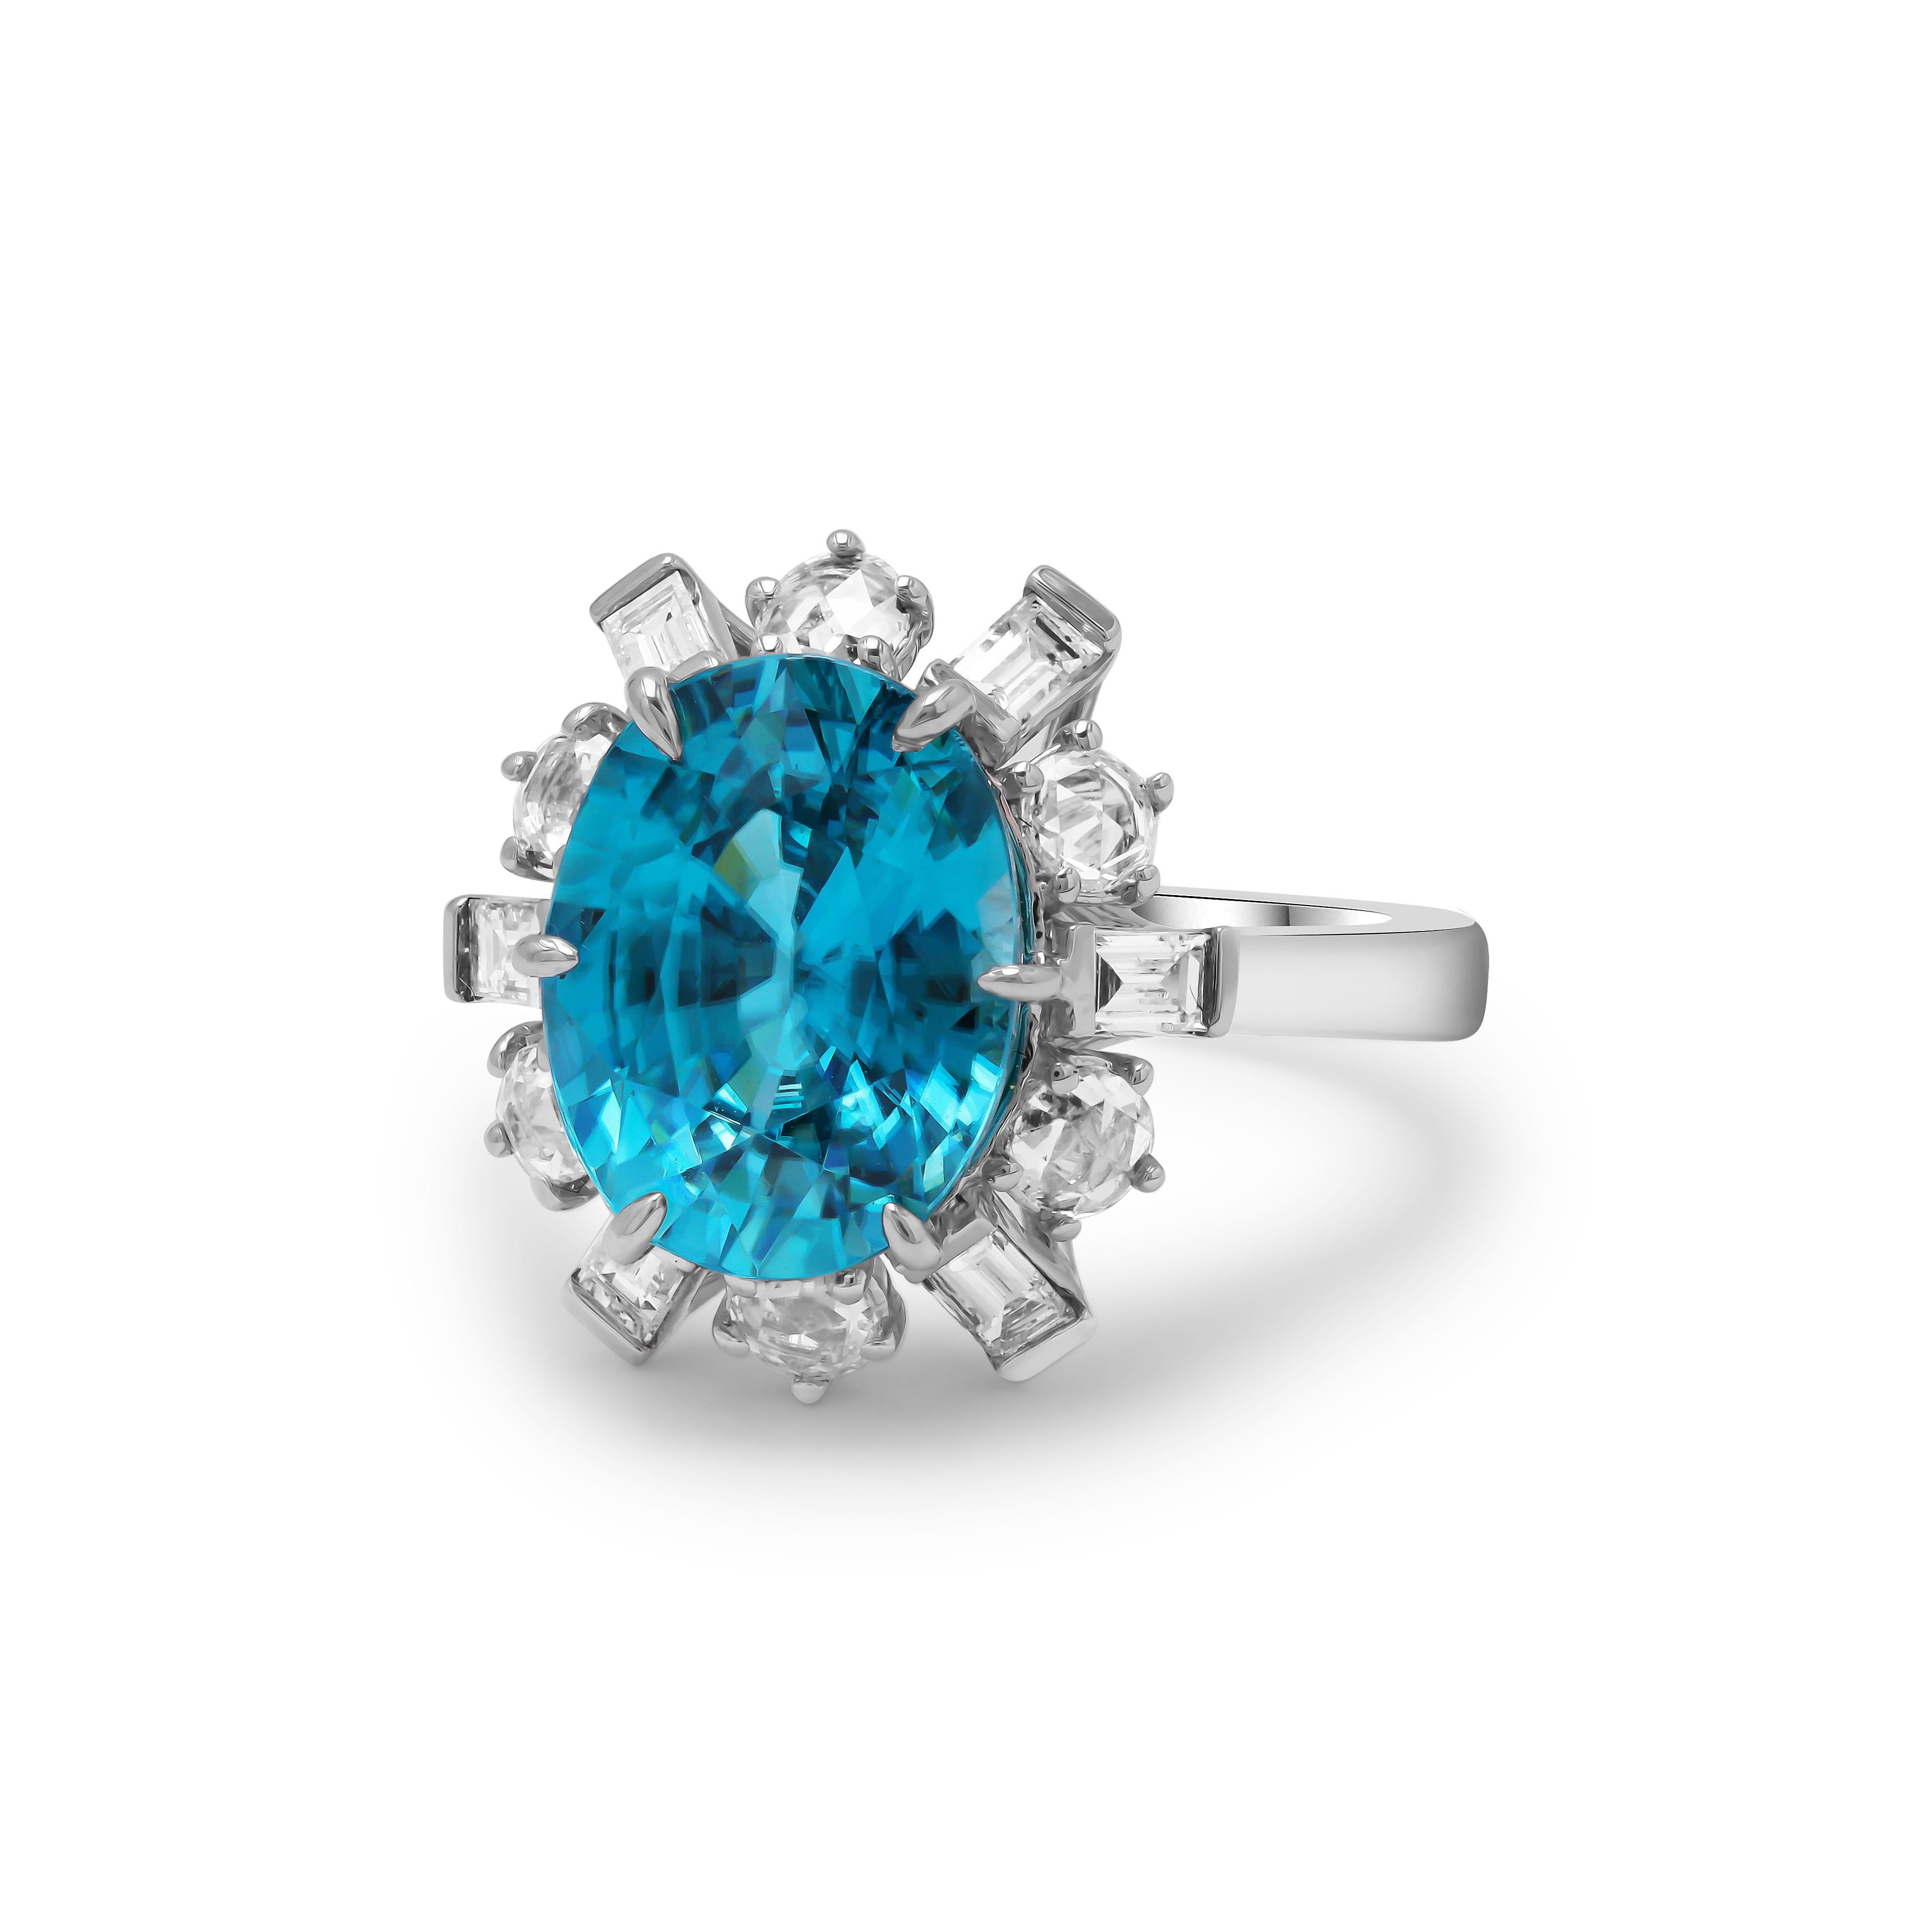 Radiating brilliance from every facet, this ring boasts a GIA Certified 6.85 carat oval-cut blue zircon center, elegantly encircled by 0.83 carats of natural diamonds. The charm of this piece is further enhanced by the intricate hand-engraved